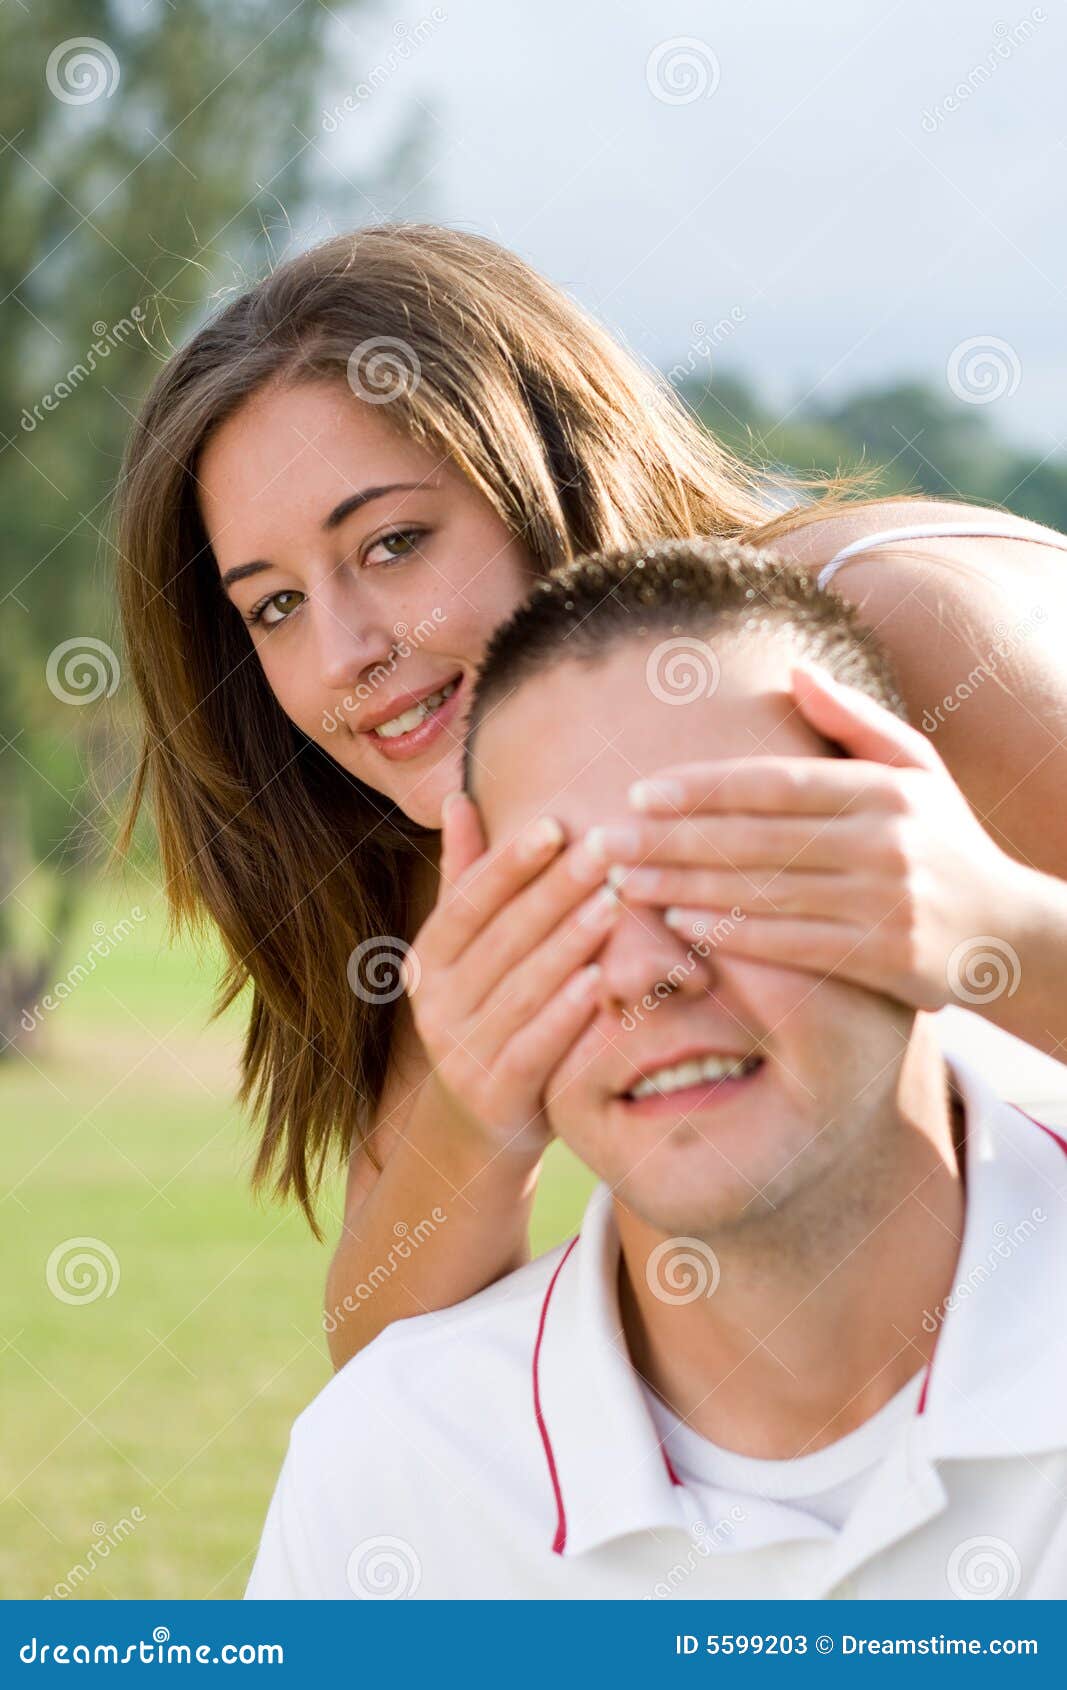 Playful Teen Couple Stock Image Image Of Expressions 5599203